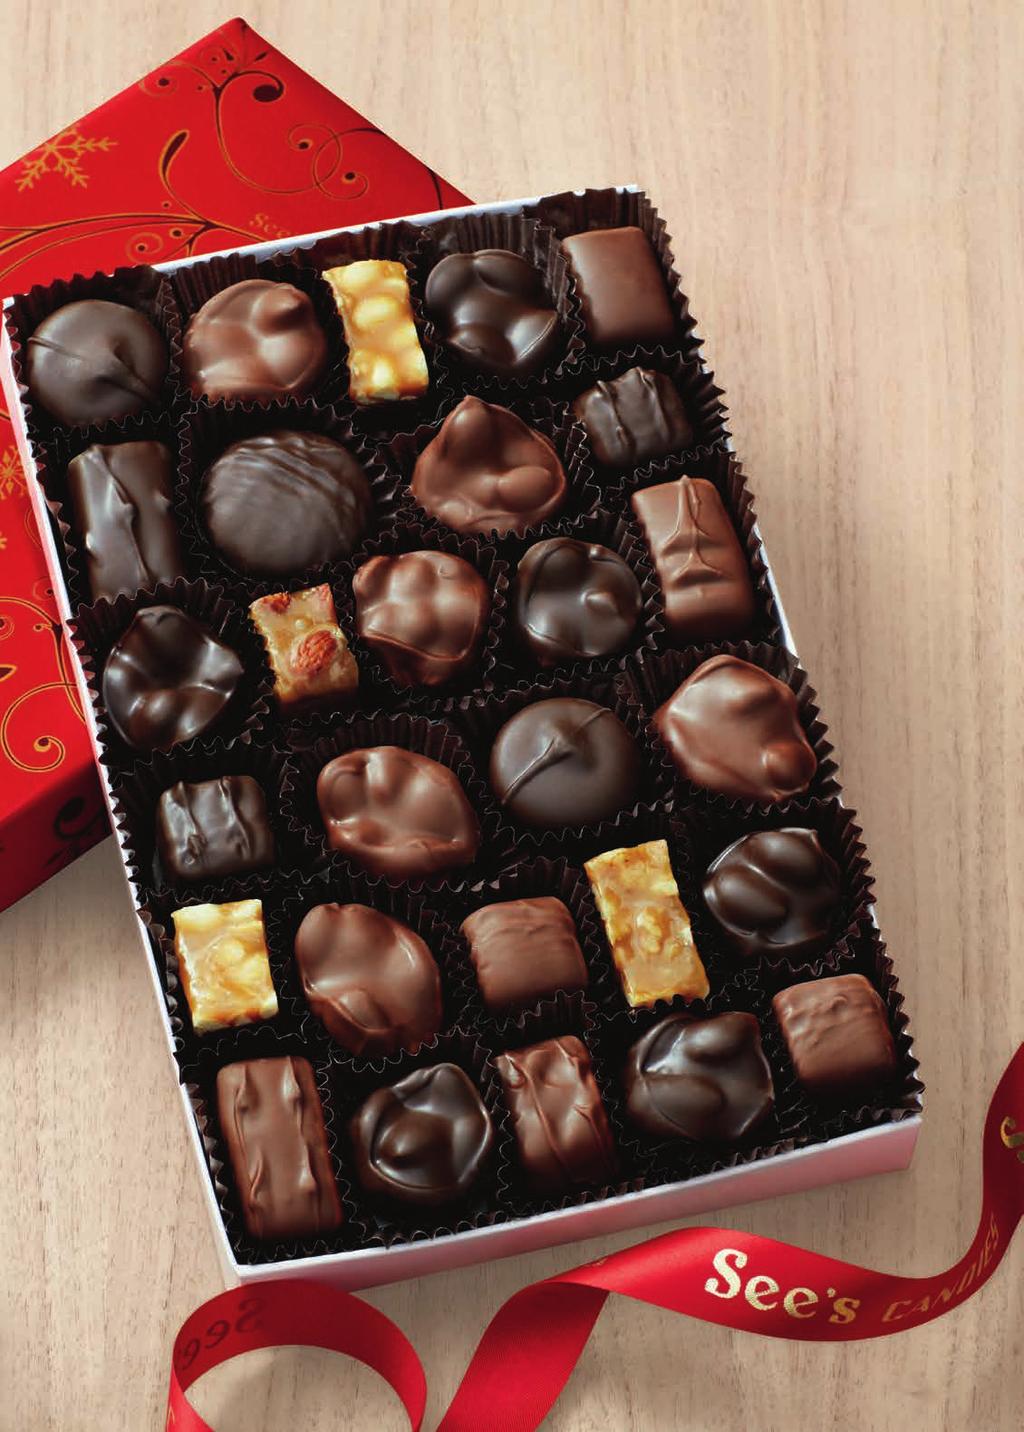 Nuts & Chews Deliciously crunchy and chewy. The perfect mix of flavor and texture, featuring premium roasted nuts, creamy caramels and more, enrobed in milk and dark chocolate.